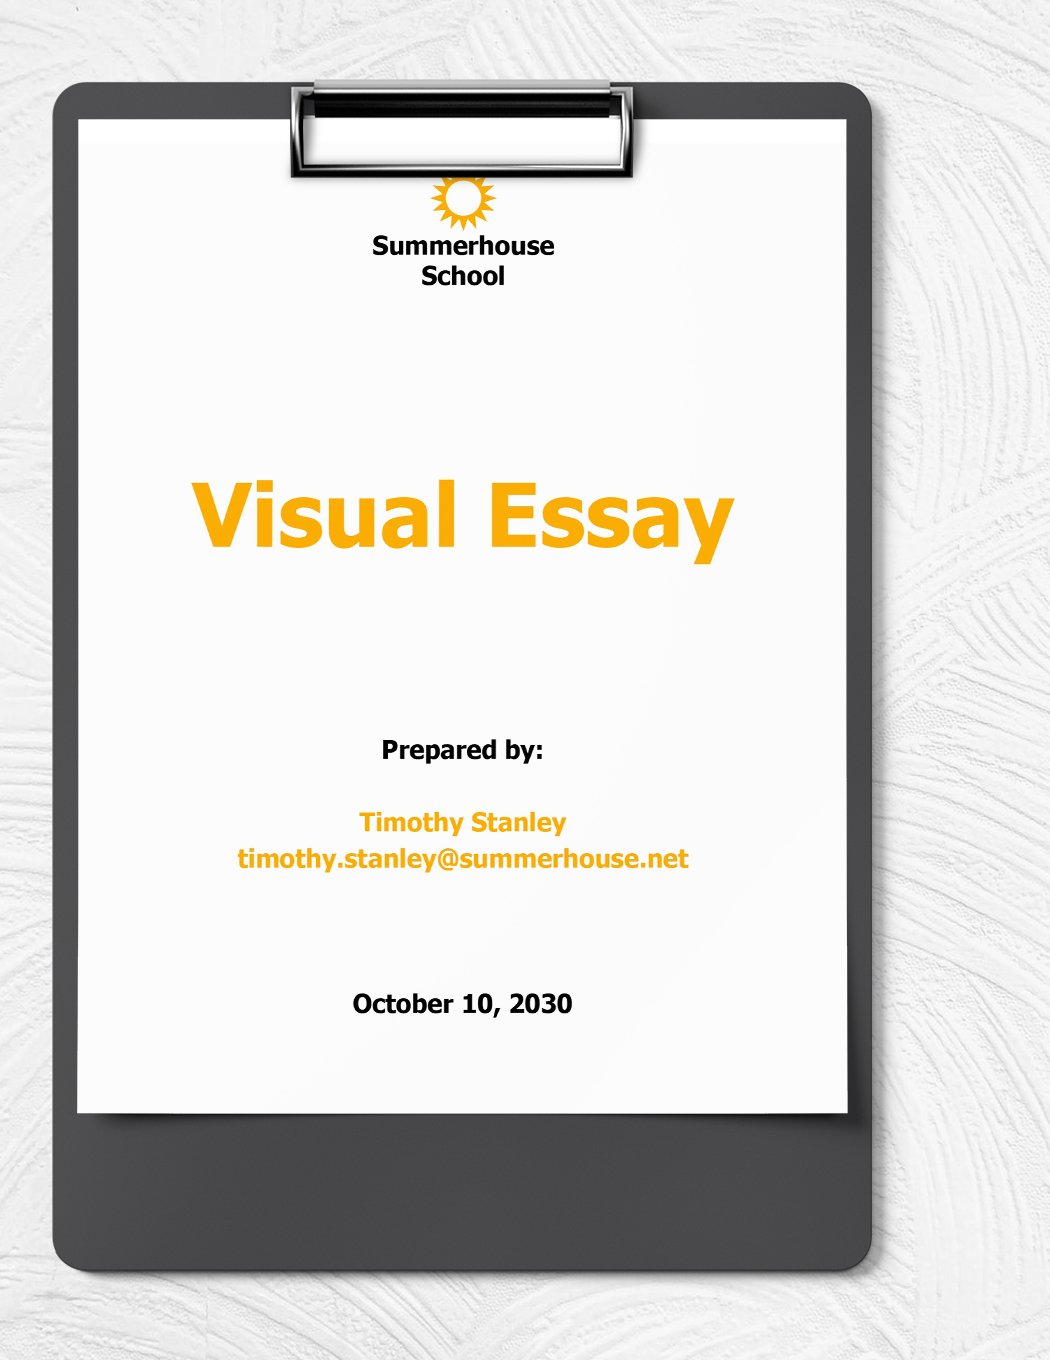 Visual Essay Template in Word, Google Docs